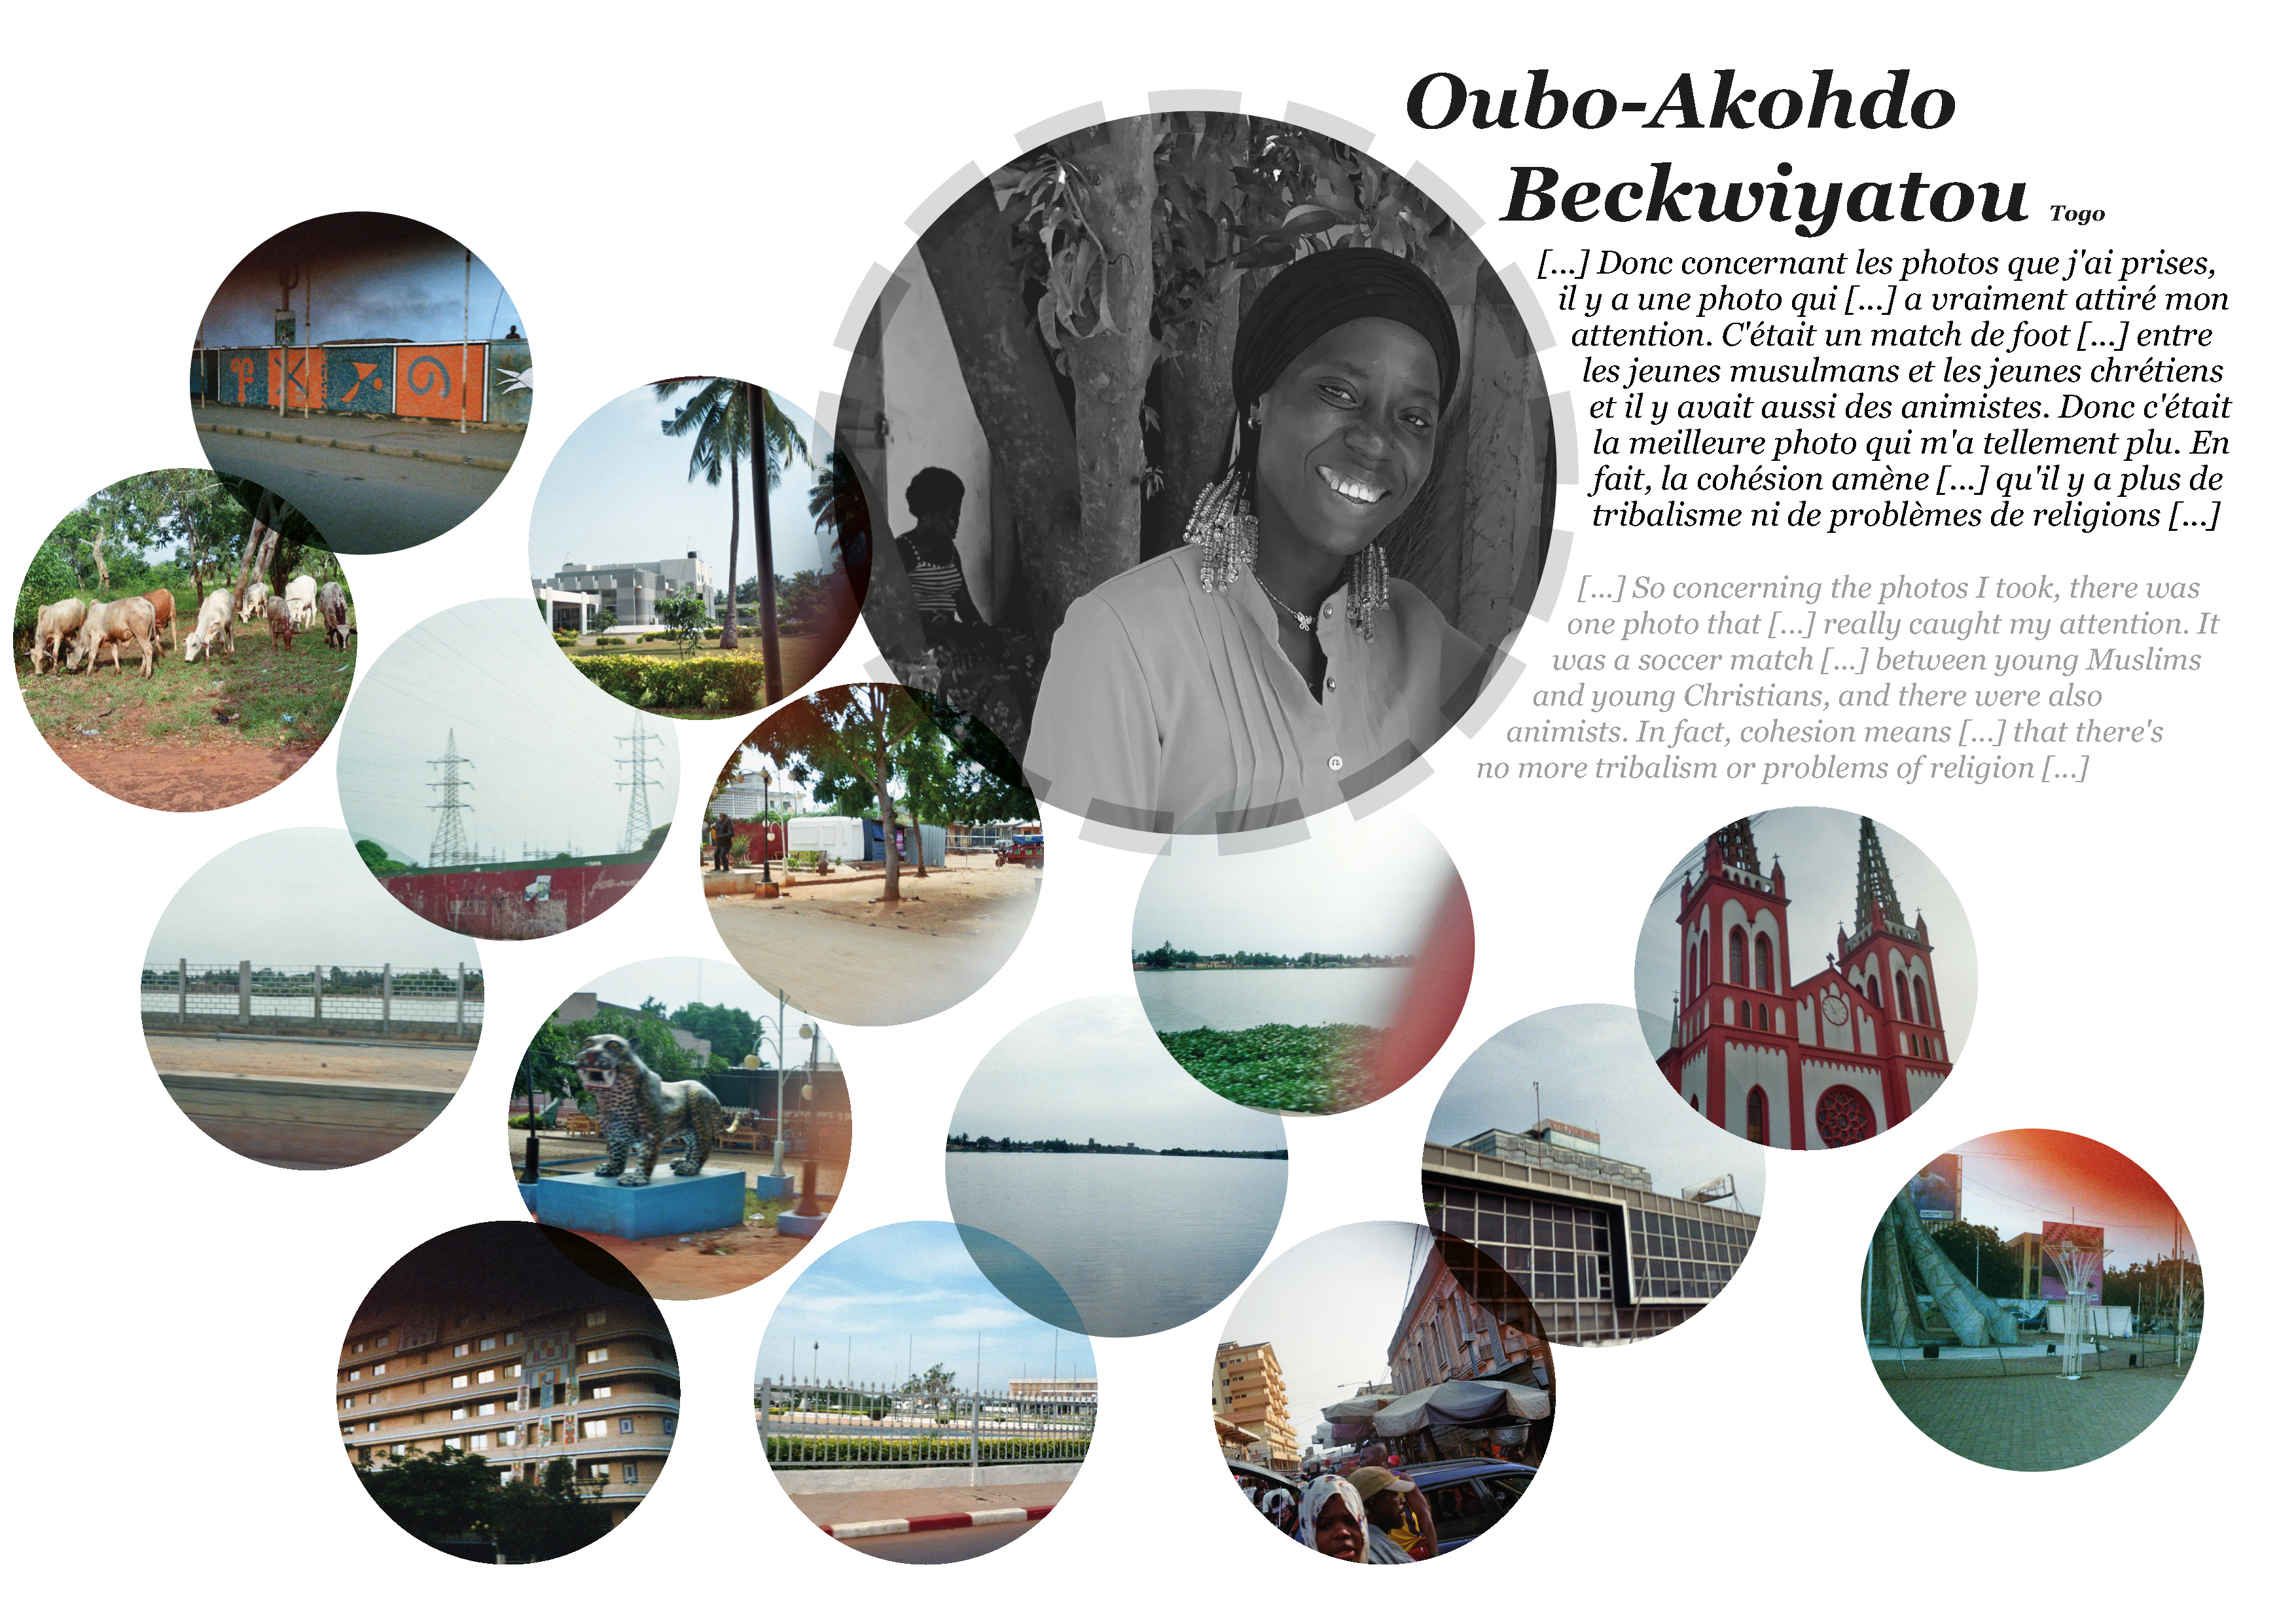 Collage of pictures of religion and peace by Oubo-Akohdo Beckwiyatou in Togo